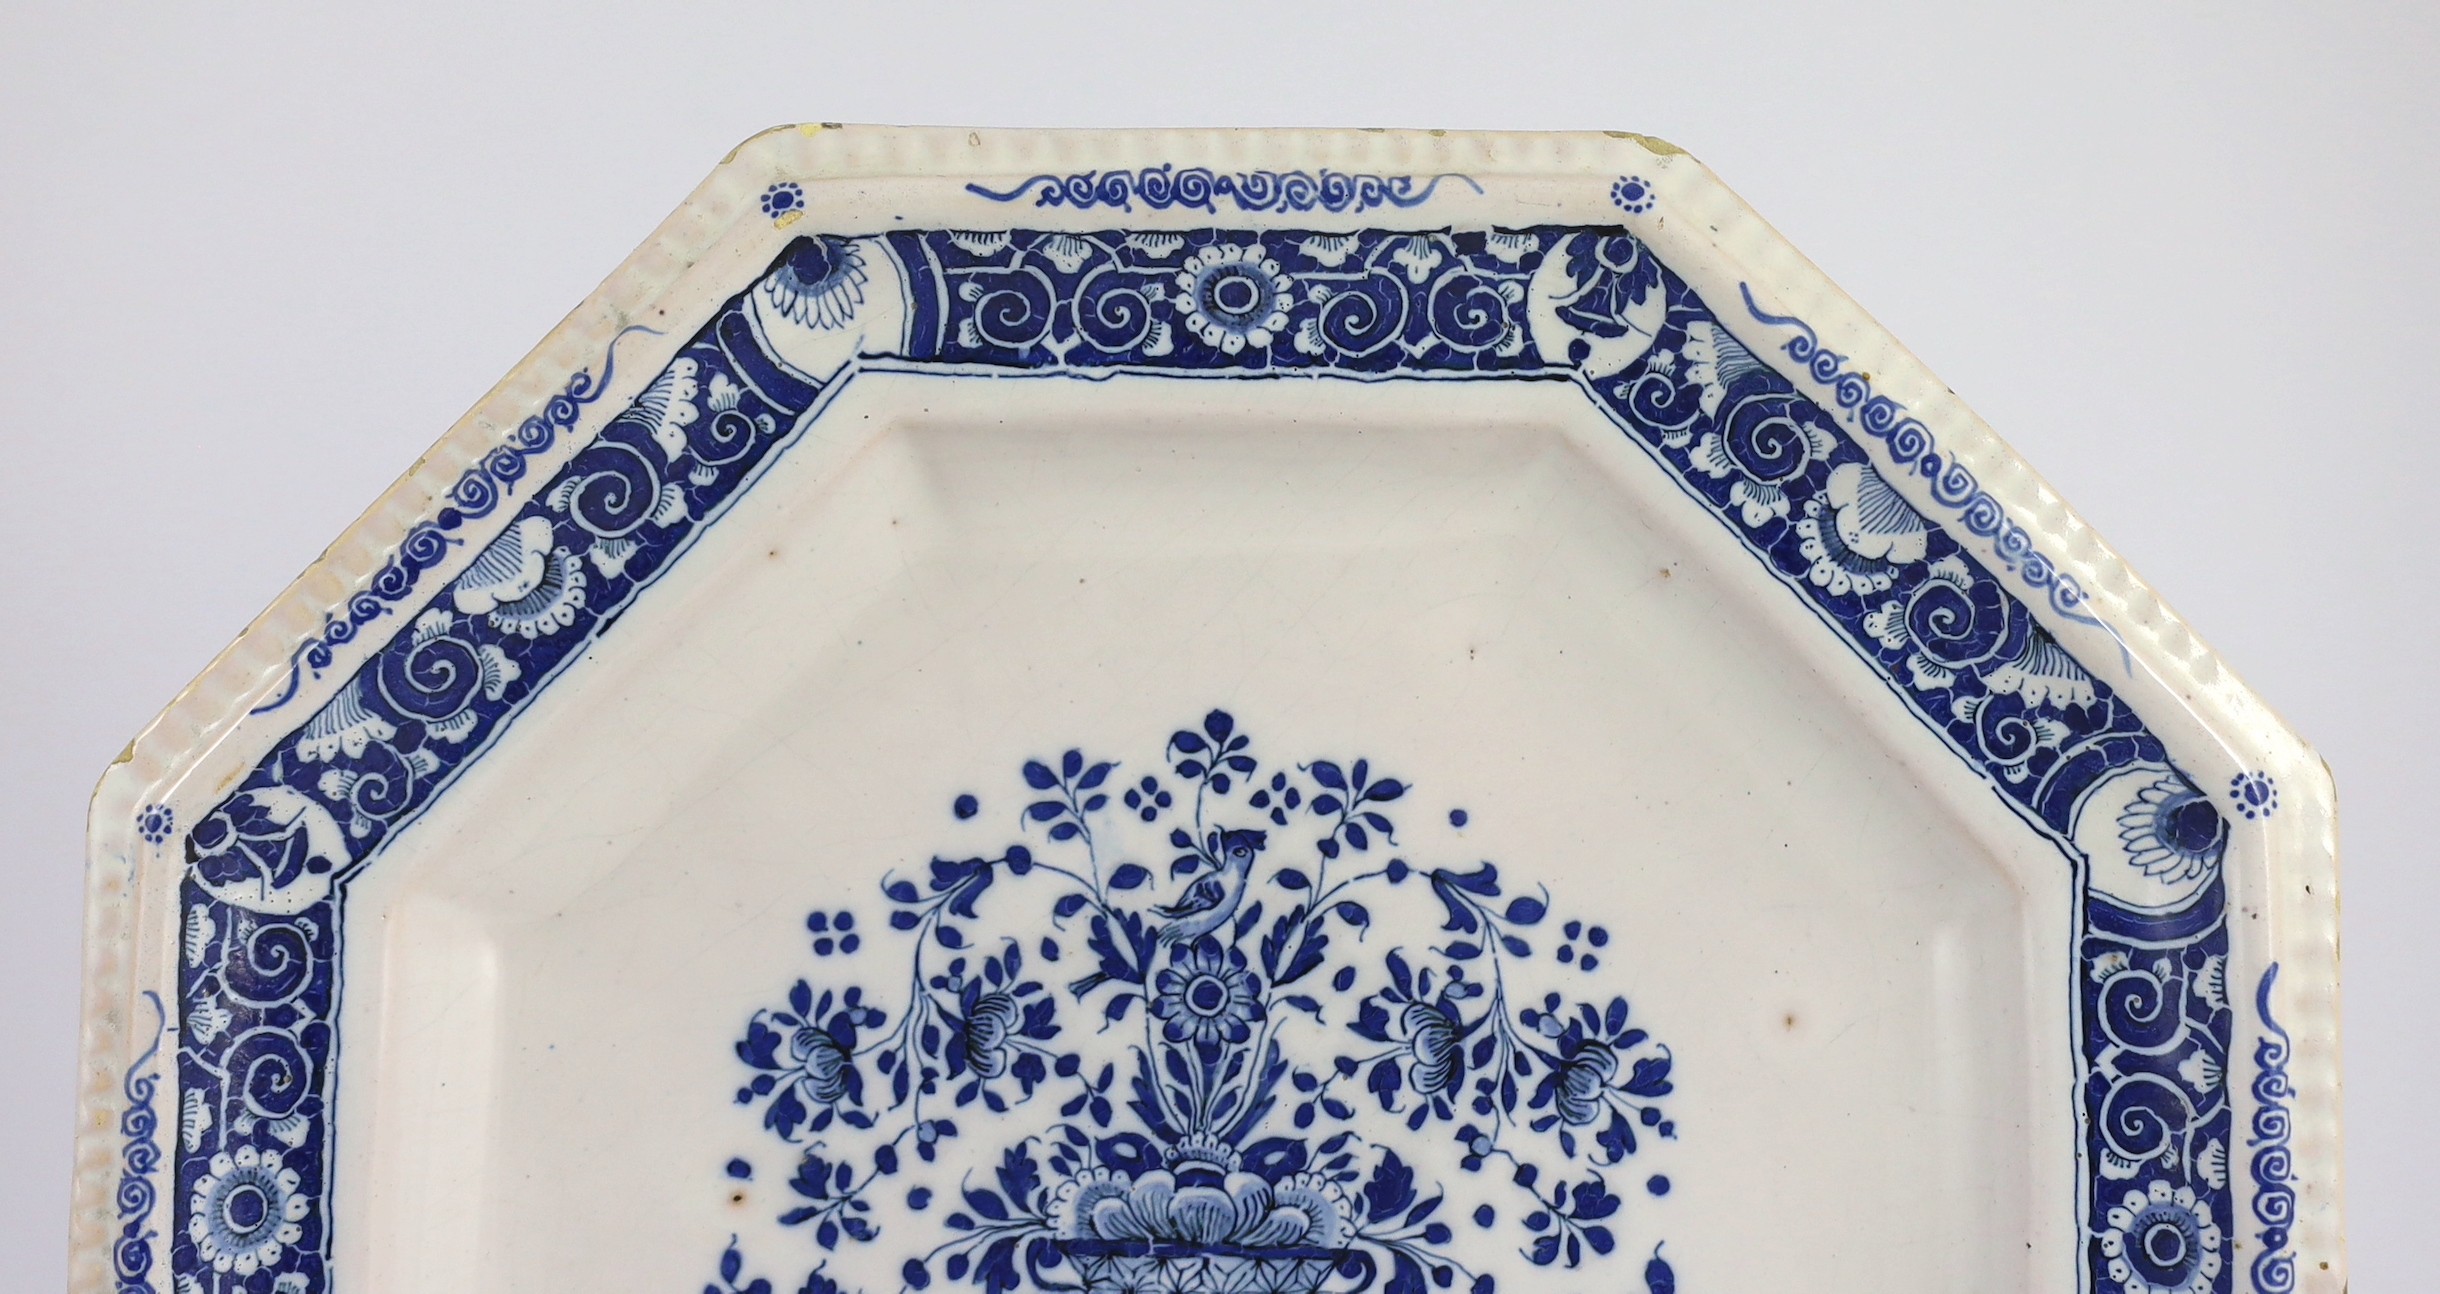 A large Strasbourg faience octagonal dish, c.1720-40, 35.5cm wide